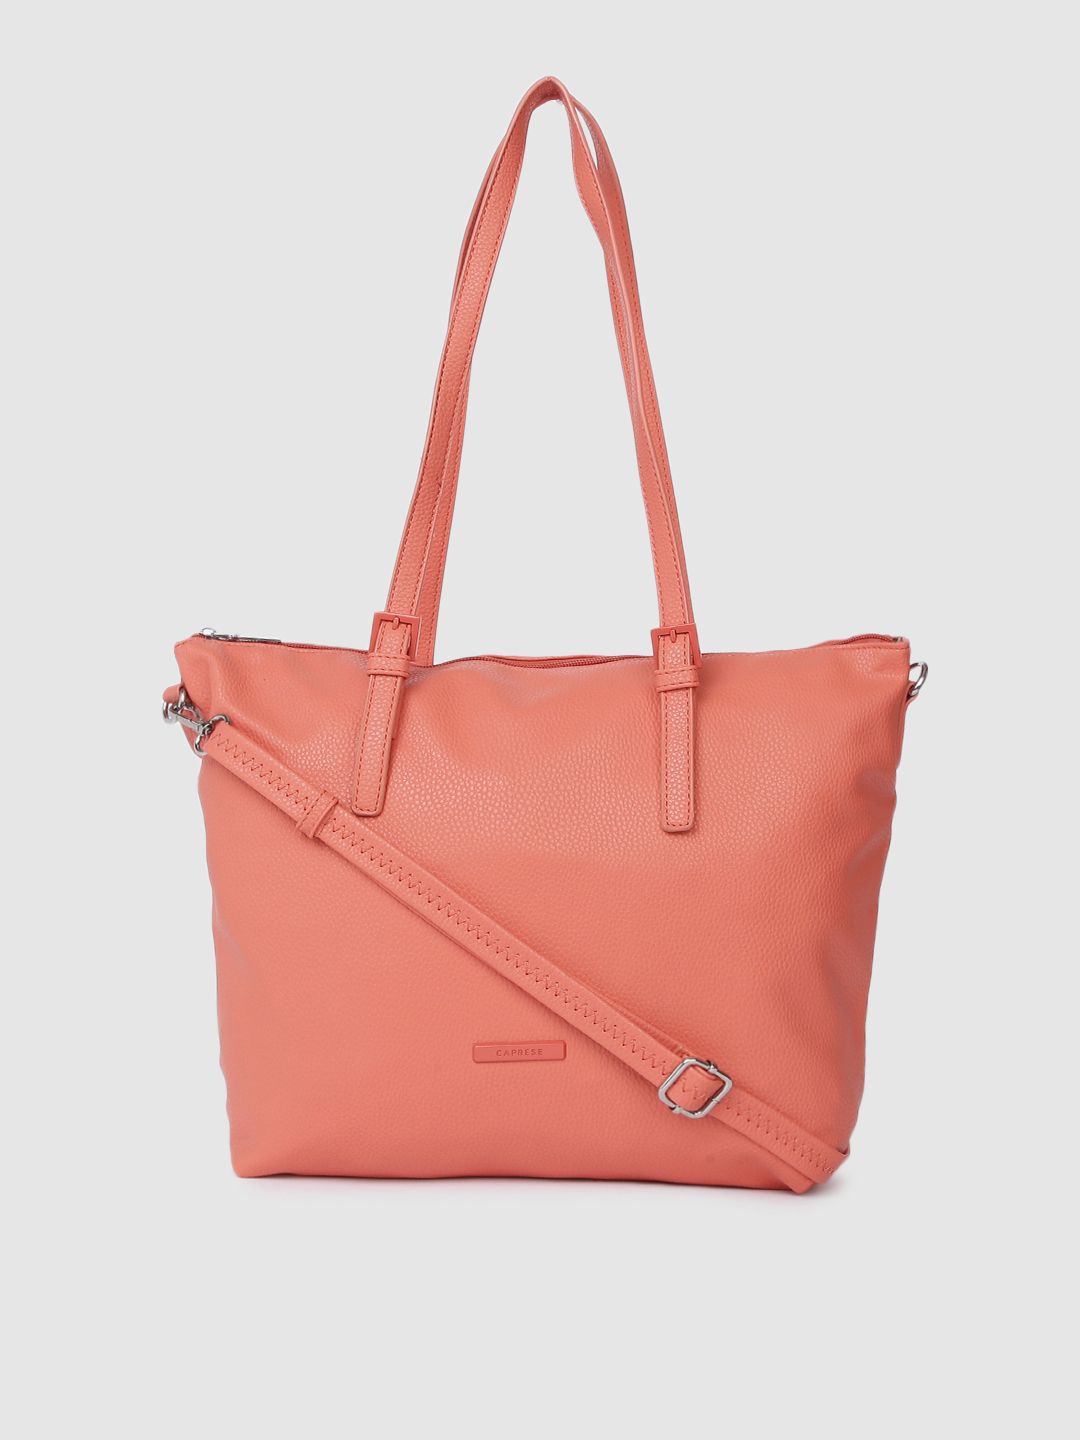 Caprese Coral Textured Leather Structured Shoulder Bag Price in India